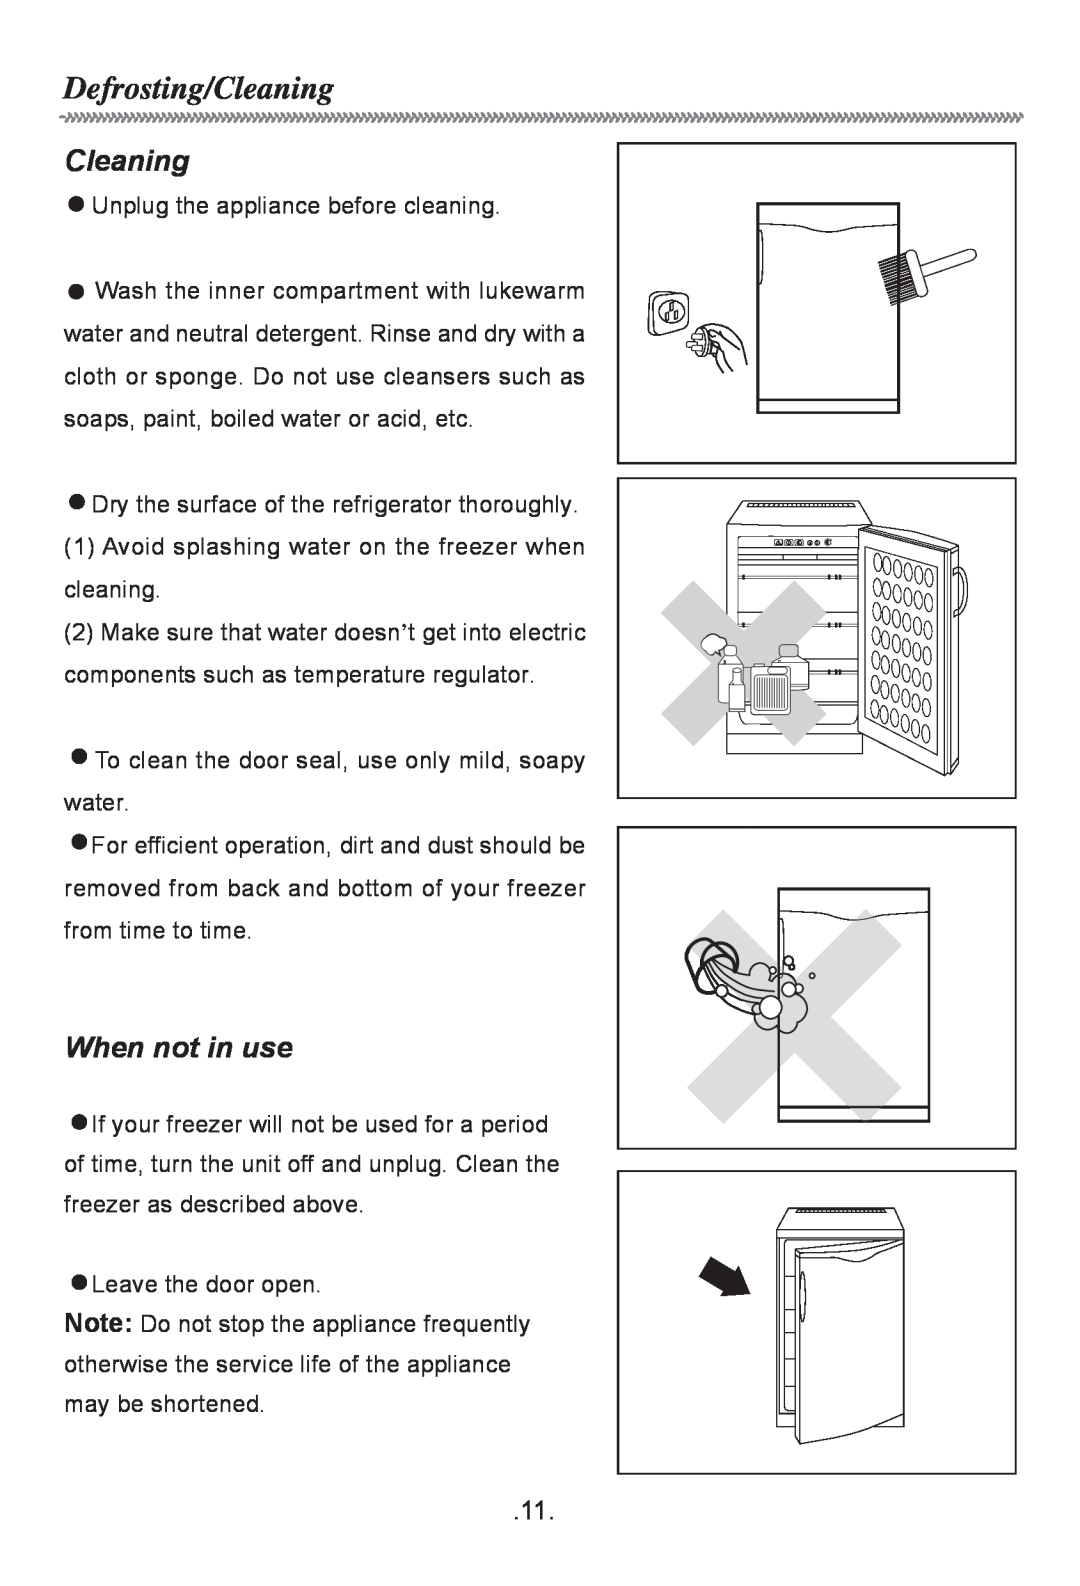 Haier HF-116R owner manual When not in use, Defrosting/Cleaning 